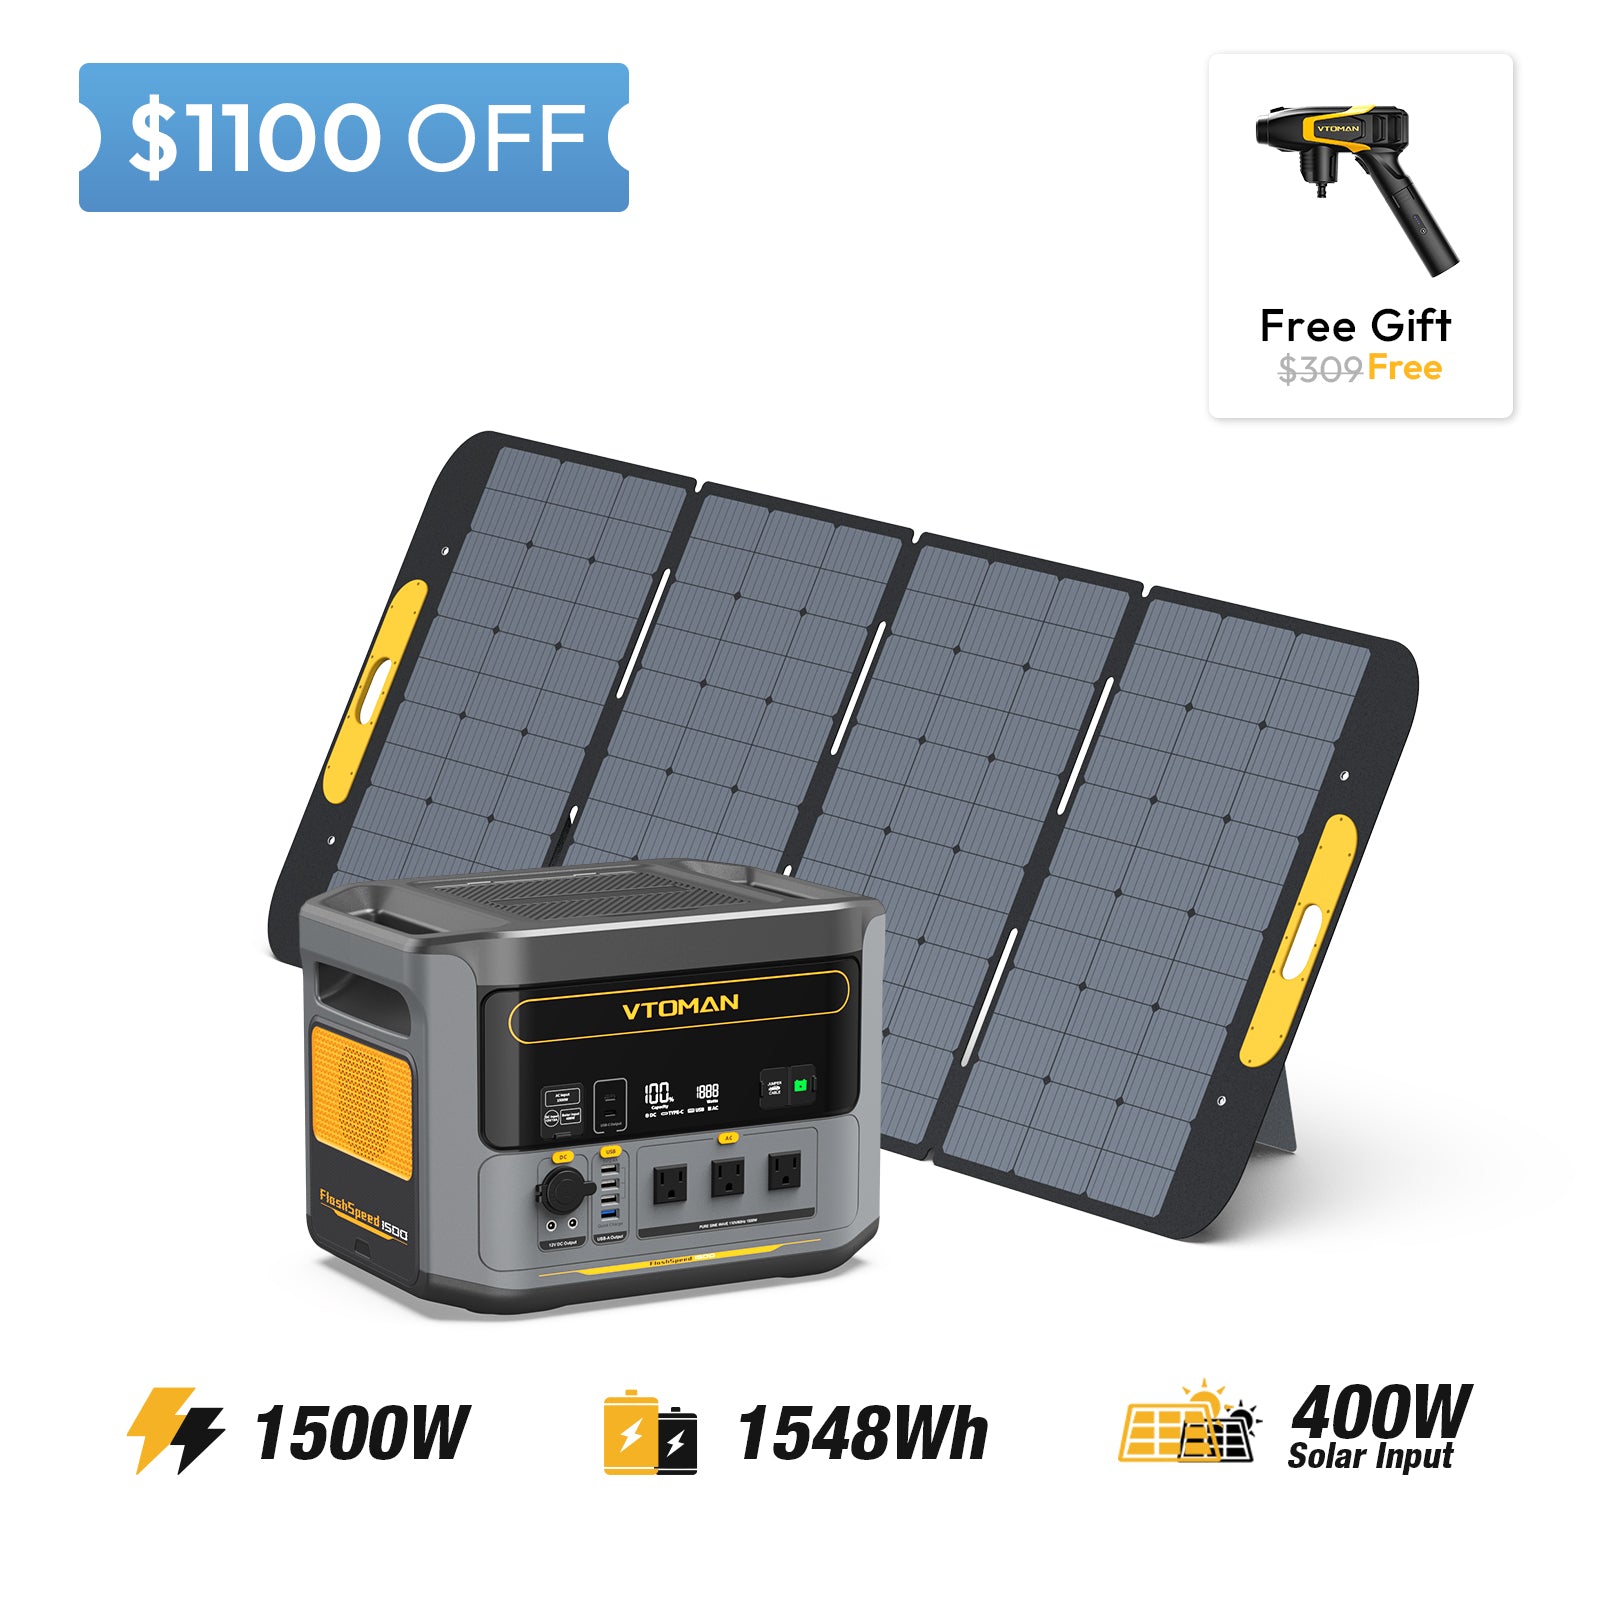 FlashSpeed 1500 and VS220 solar panel save $1100 in summer sale